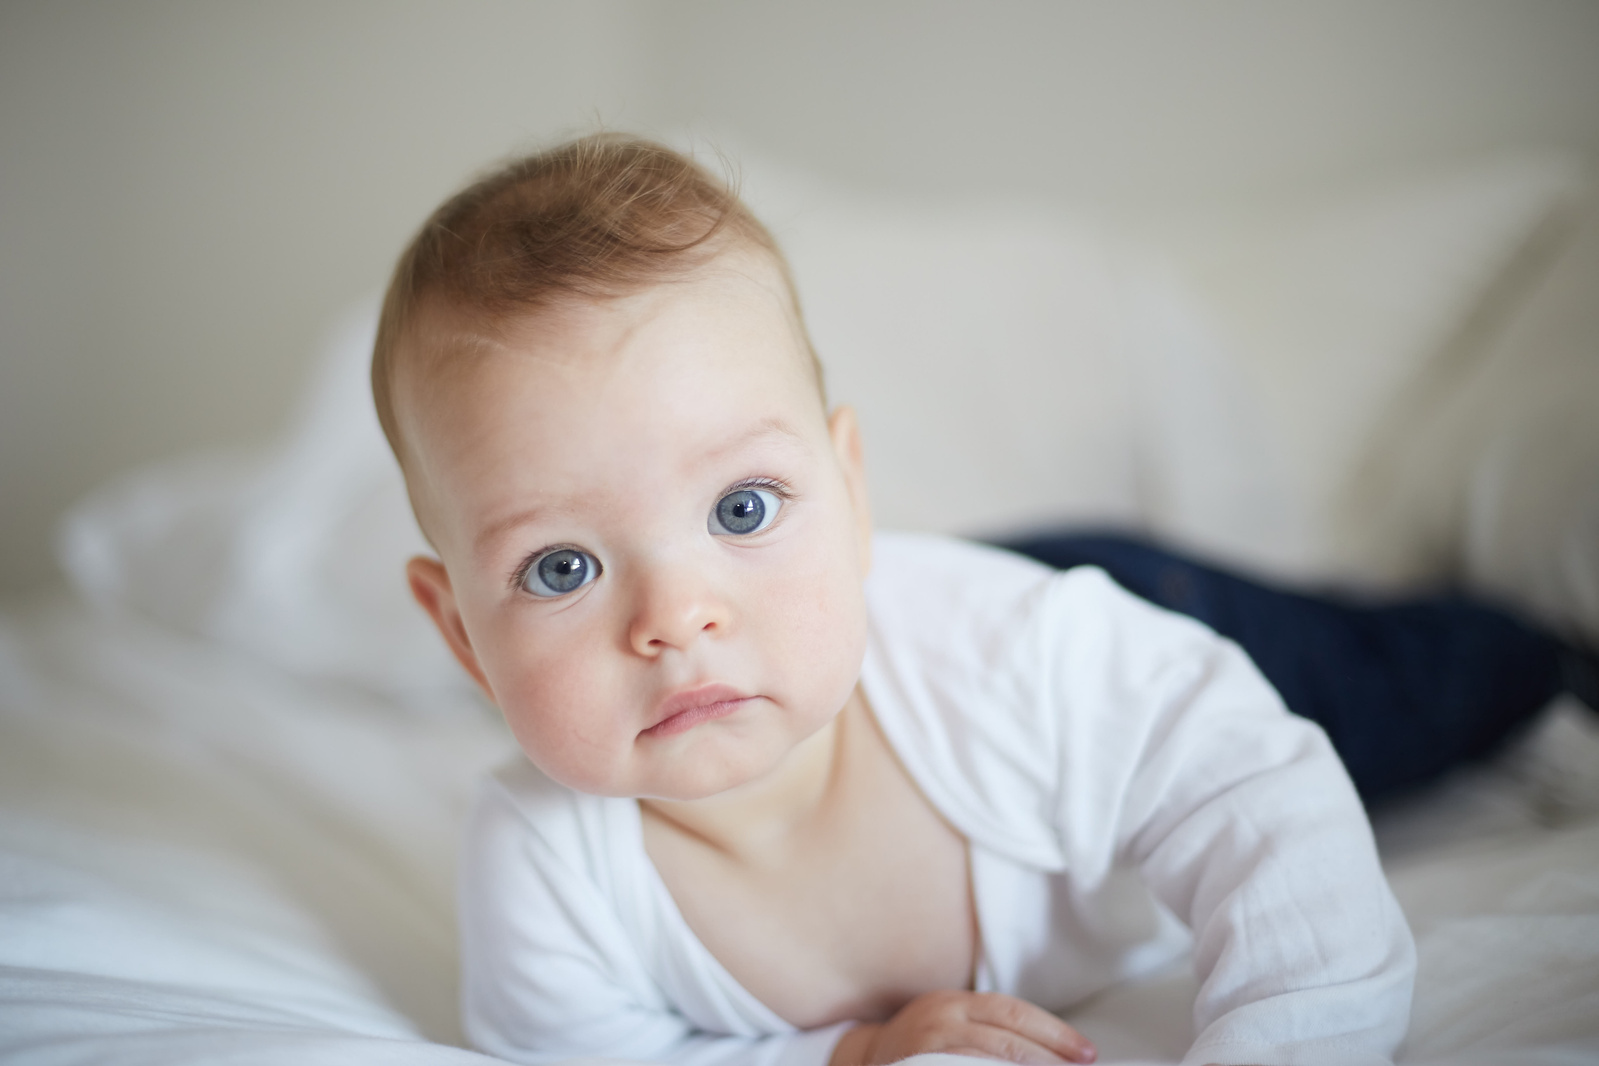 beautiful professional photograph of a baby with blue eyes looking at the camera